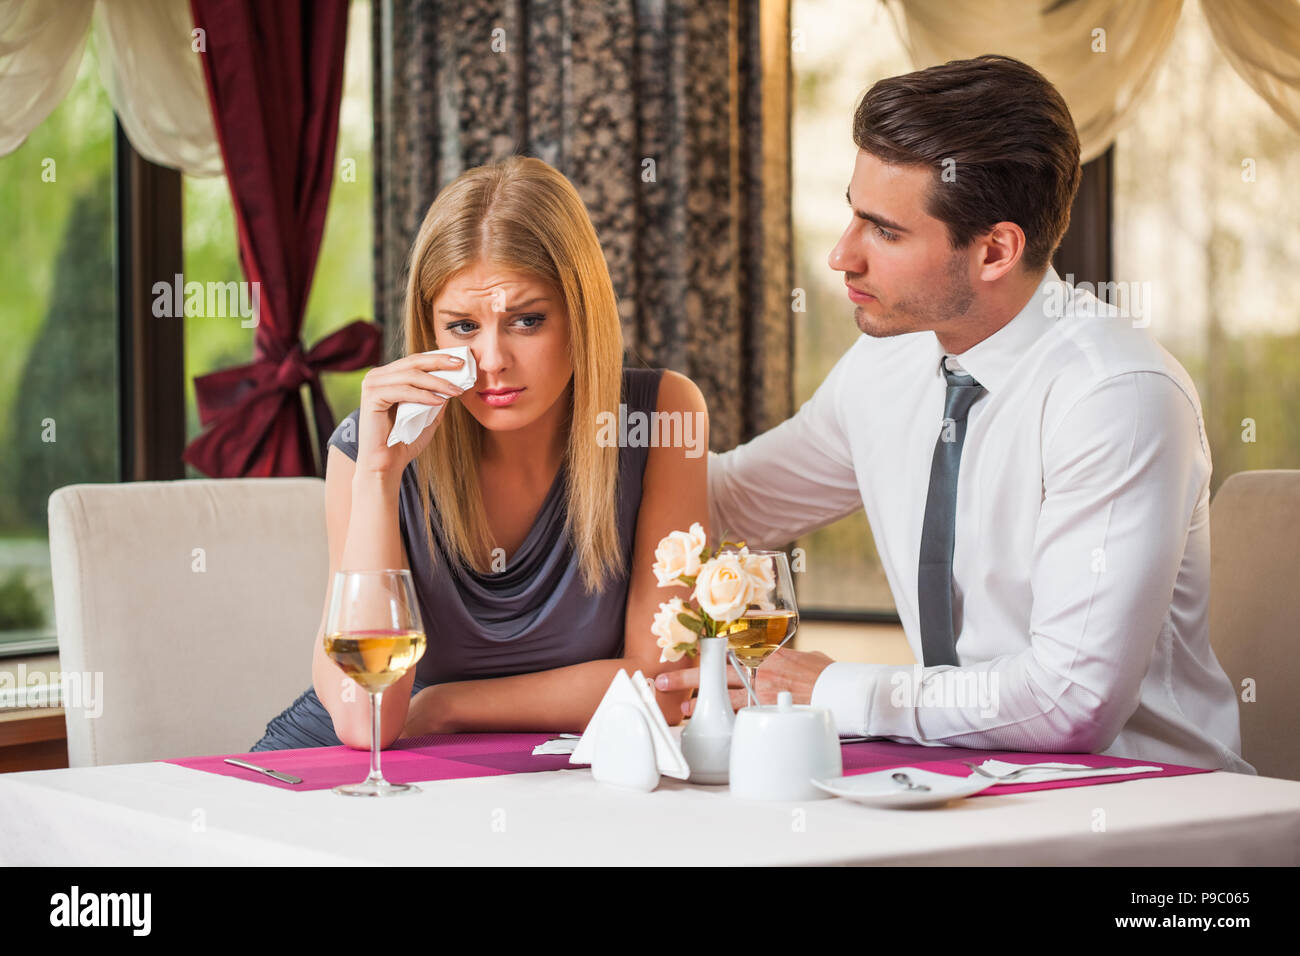 Young man is consoling his girlfriend at the restaurant Stock Photo